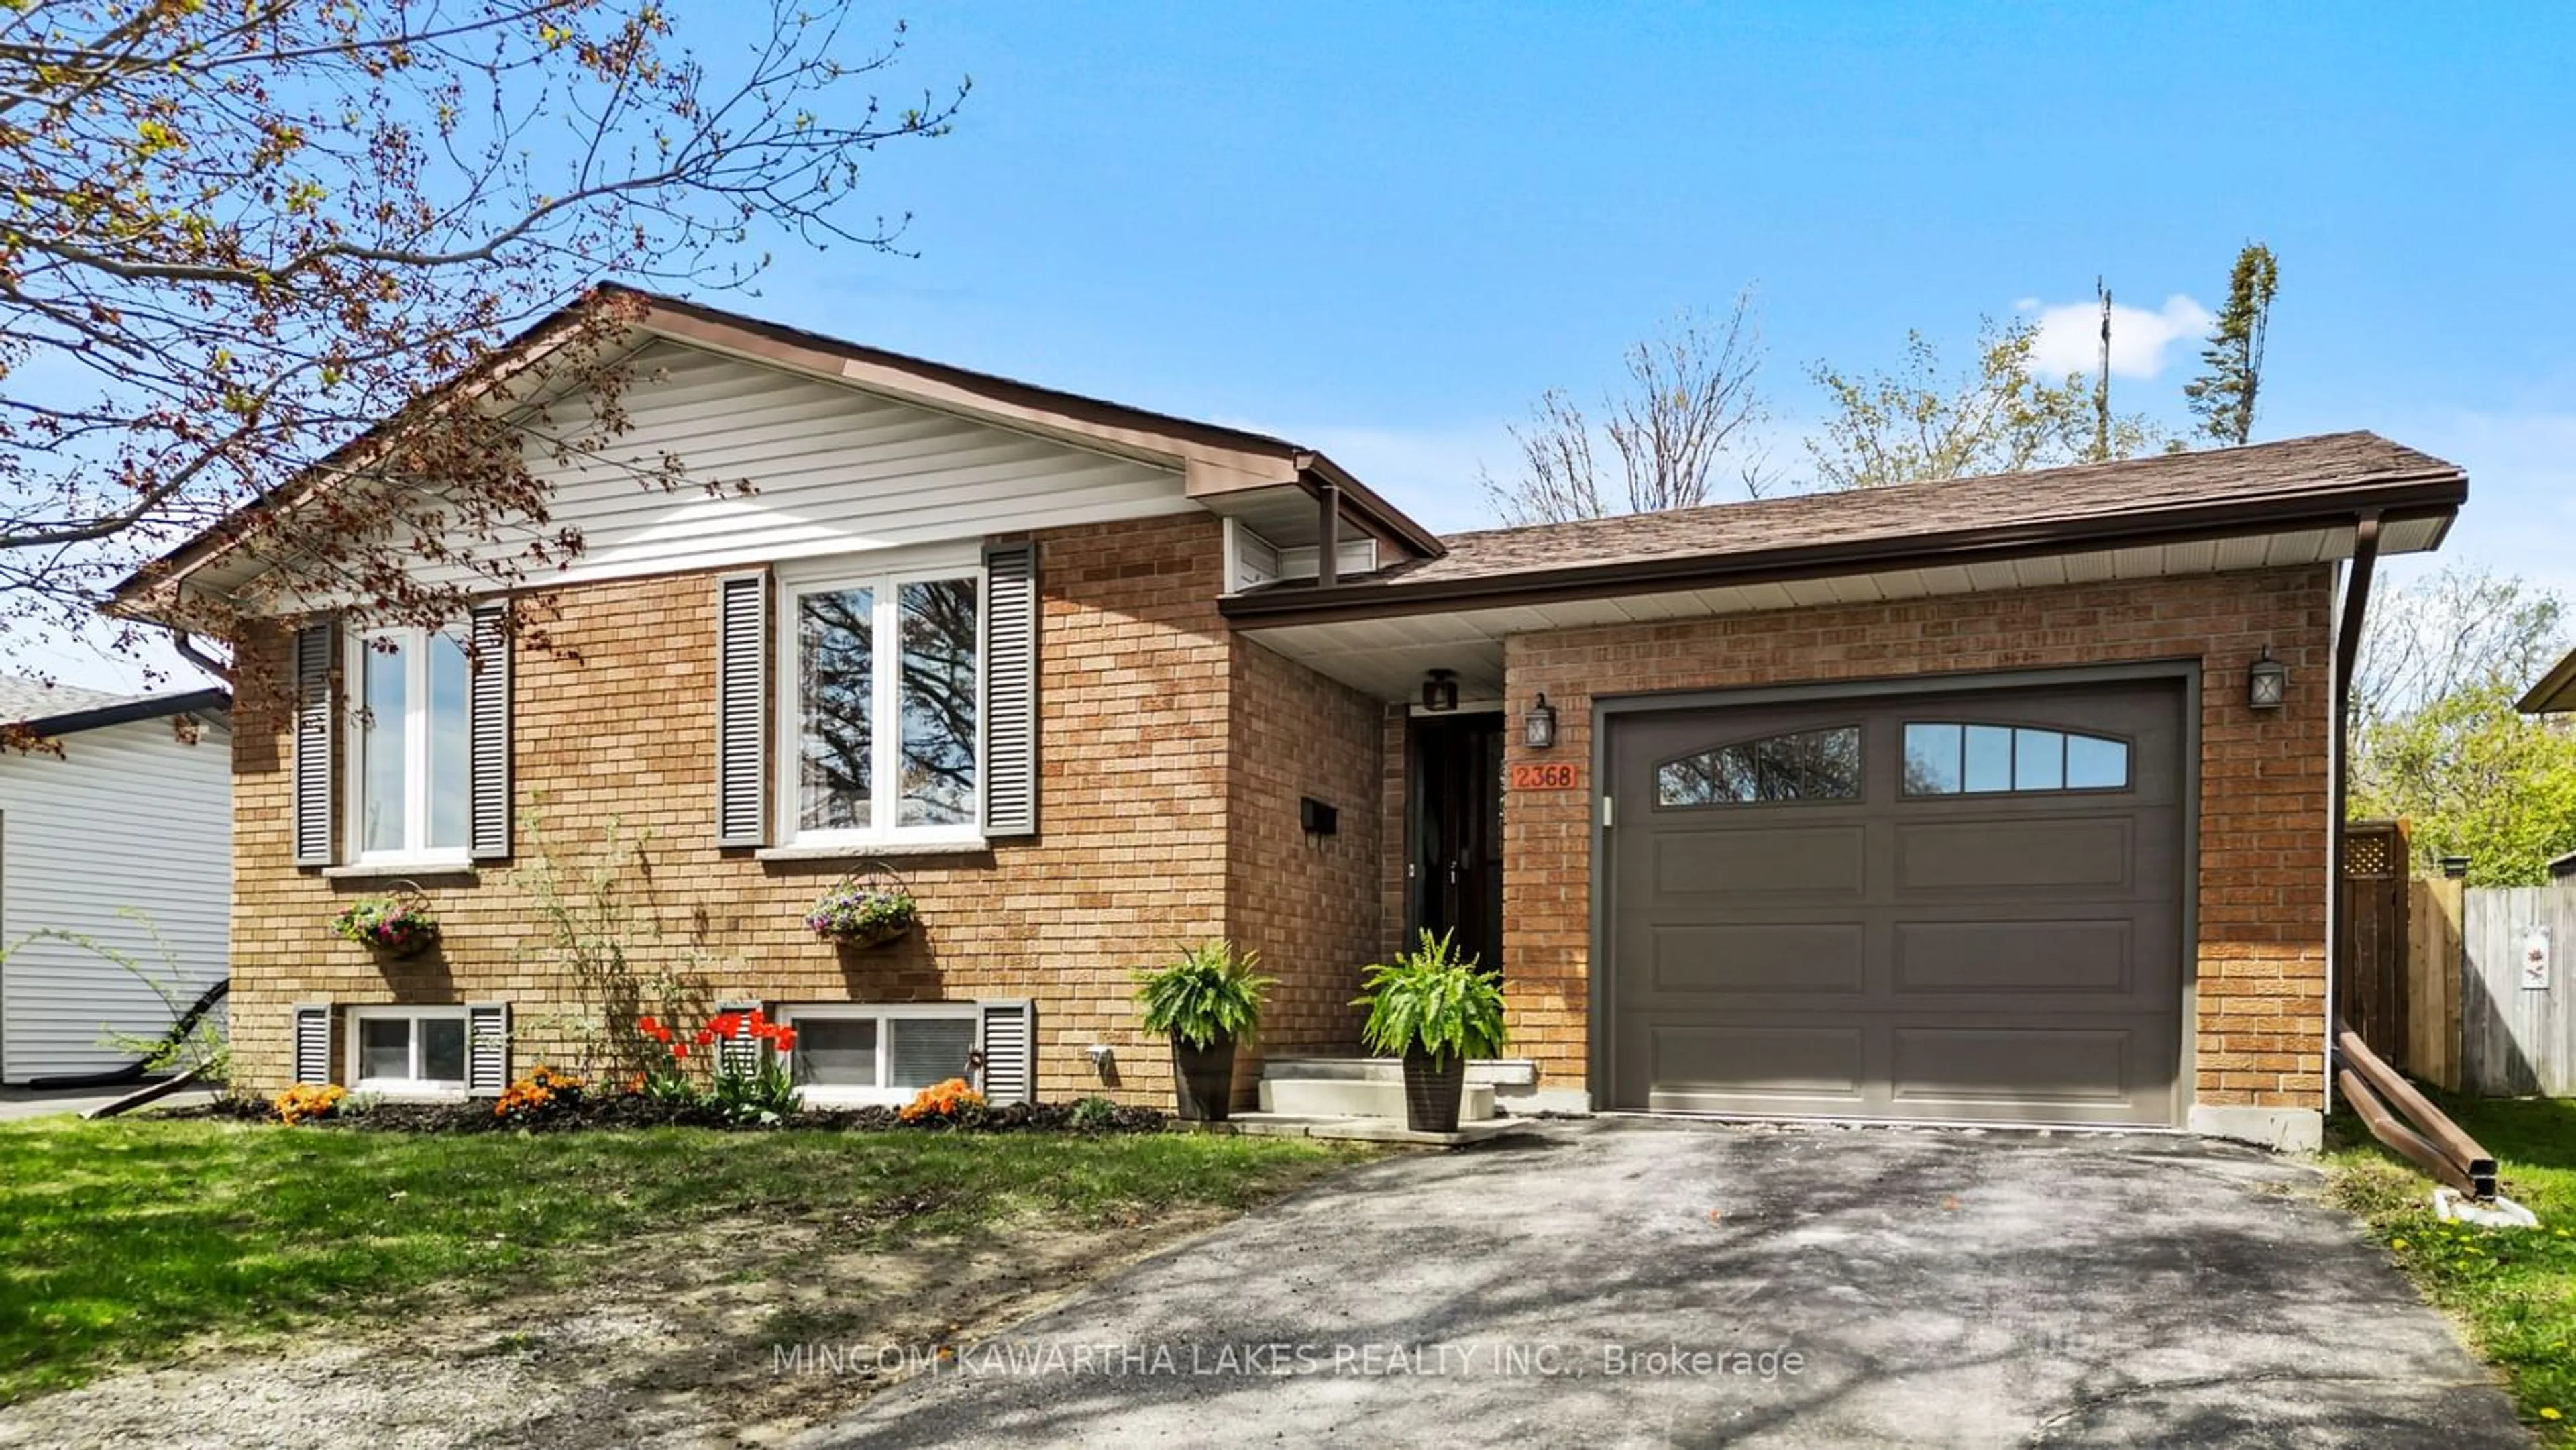 Home with brick exterior material for 2368 Mountland Dr, Peterborough Ontario K9K 1W4